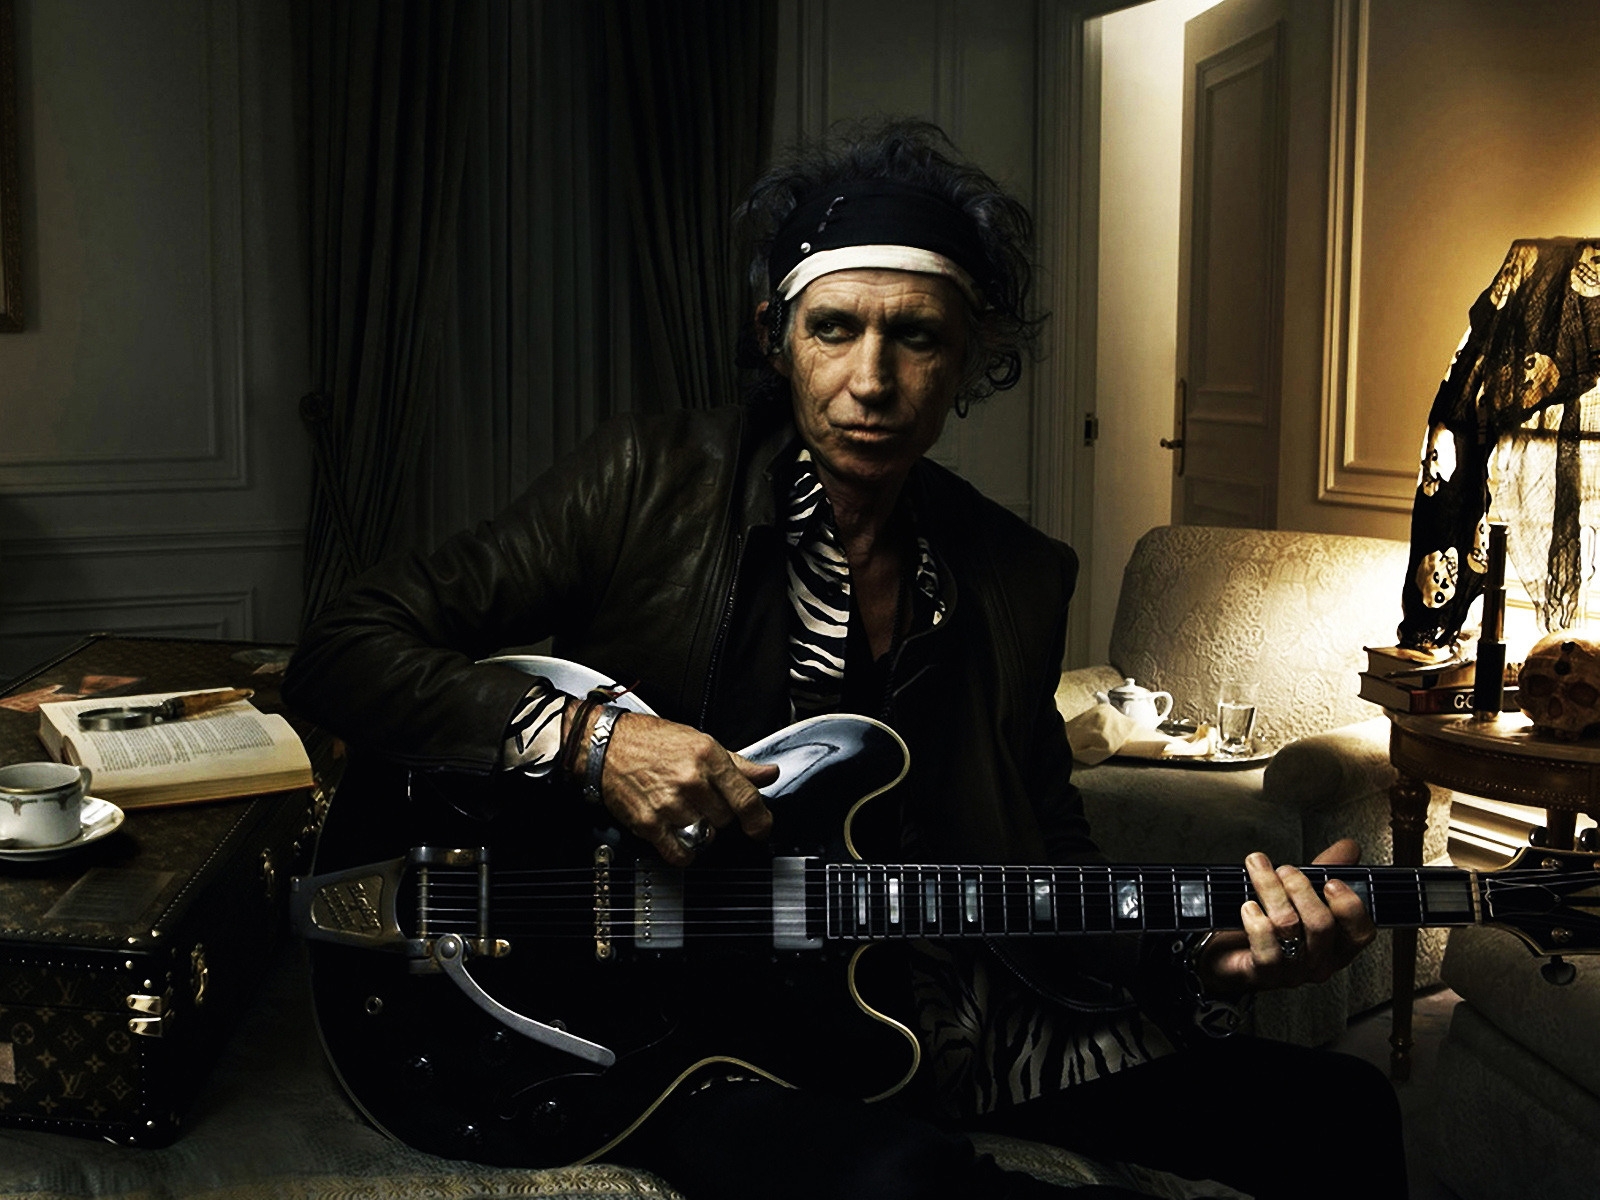 Keith Richards Guitarist Rolling Stones for 1600 x 1200 resolution